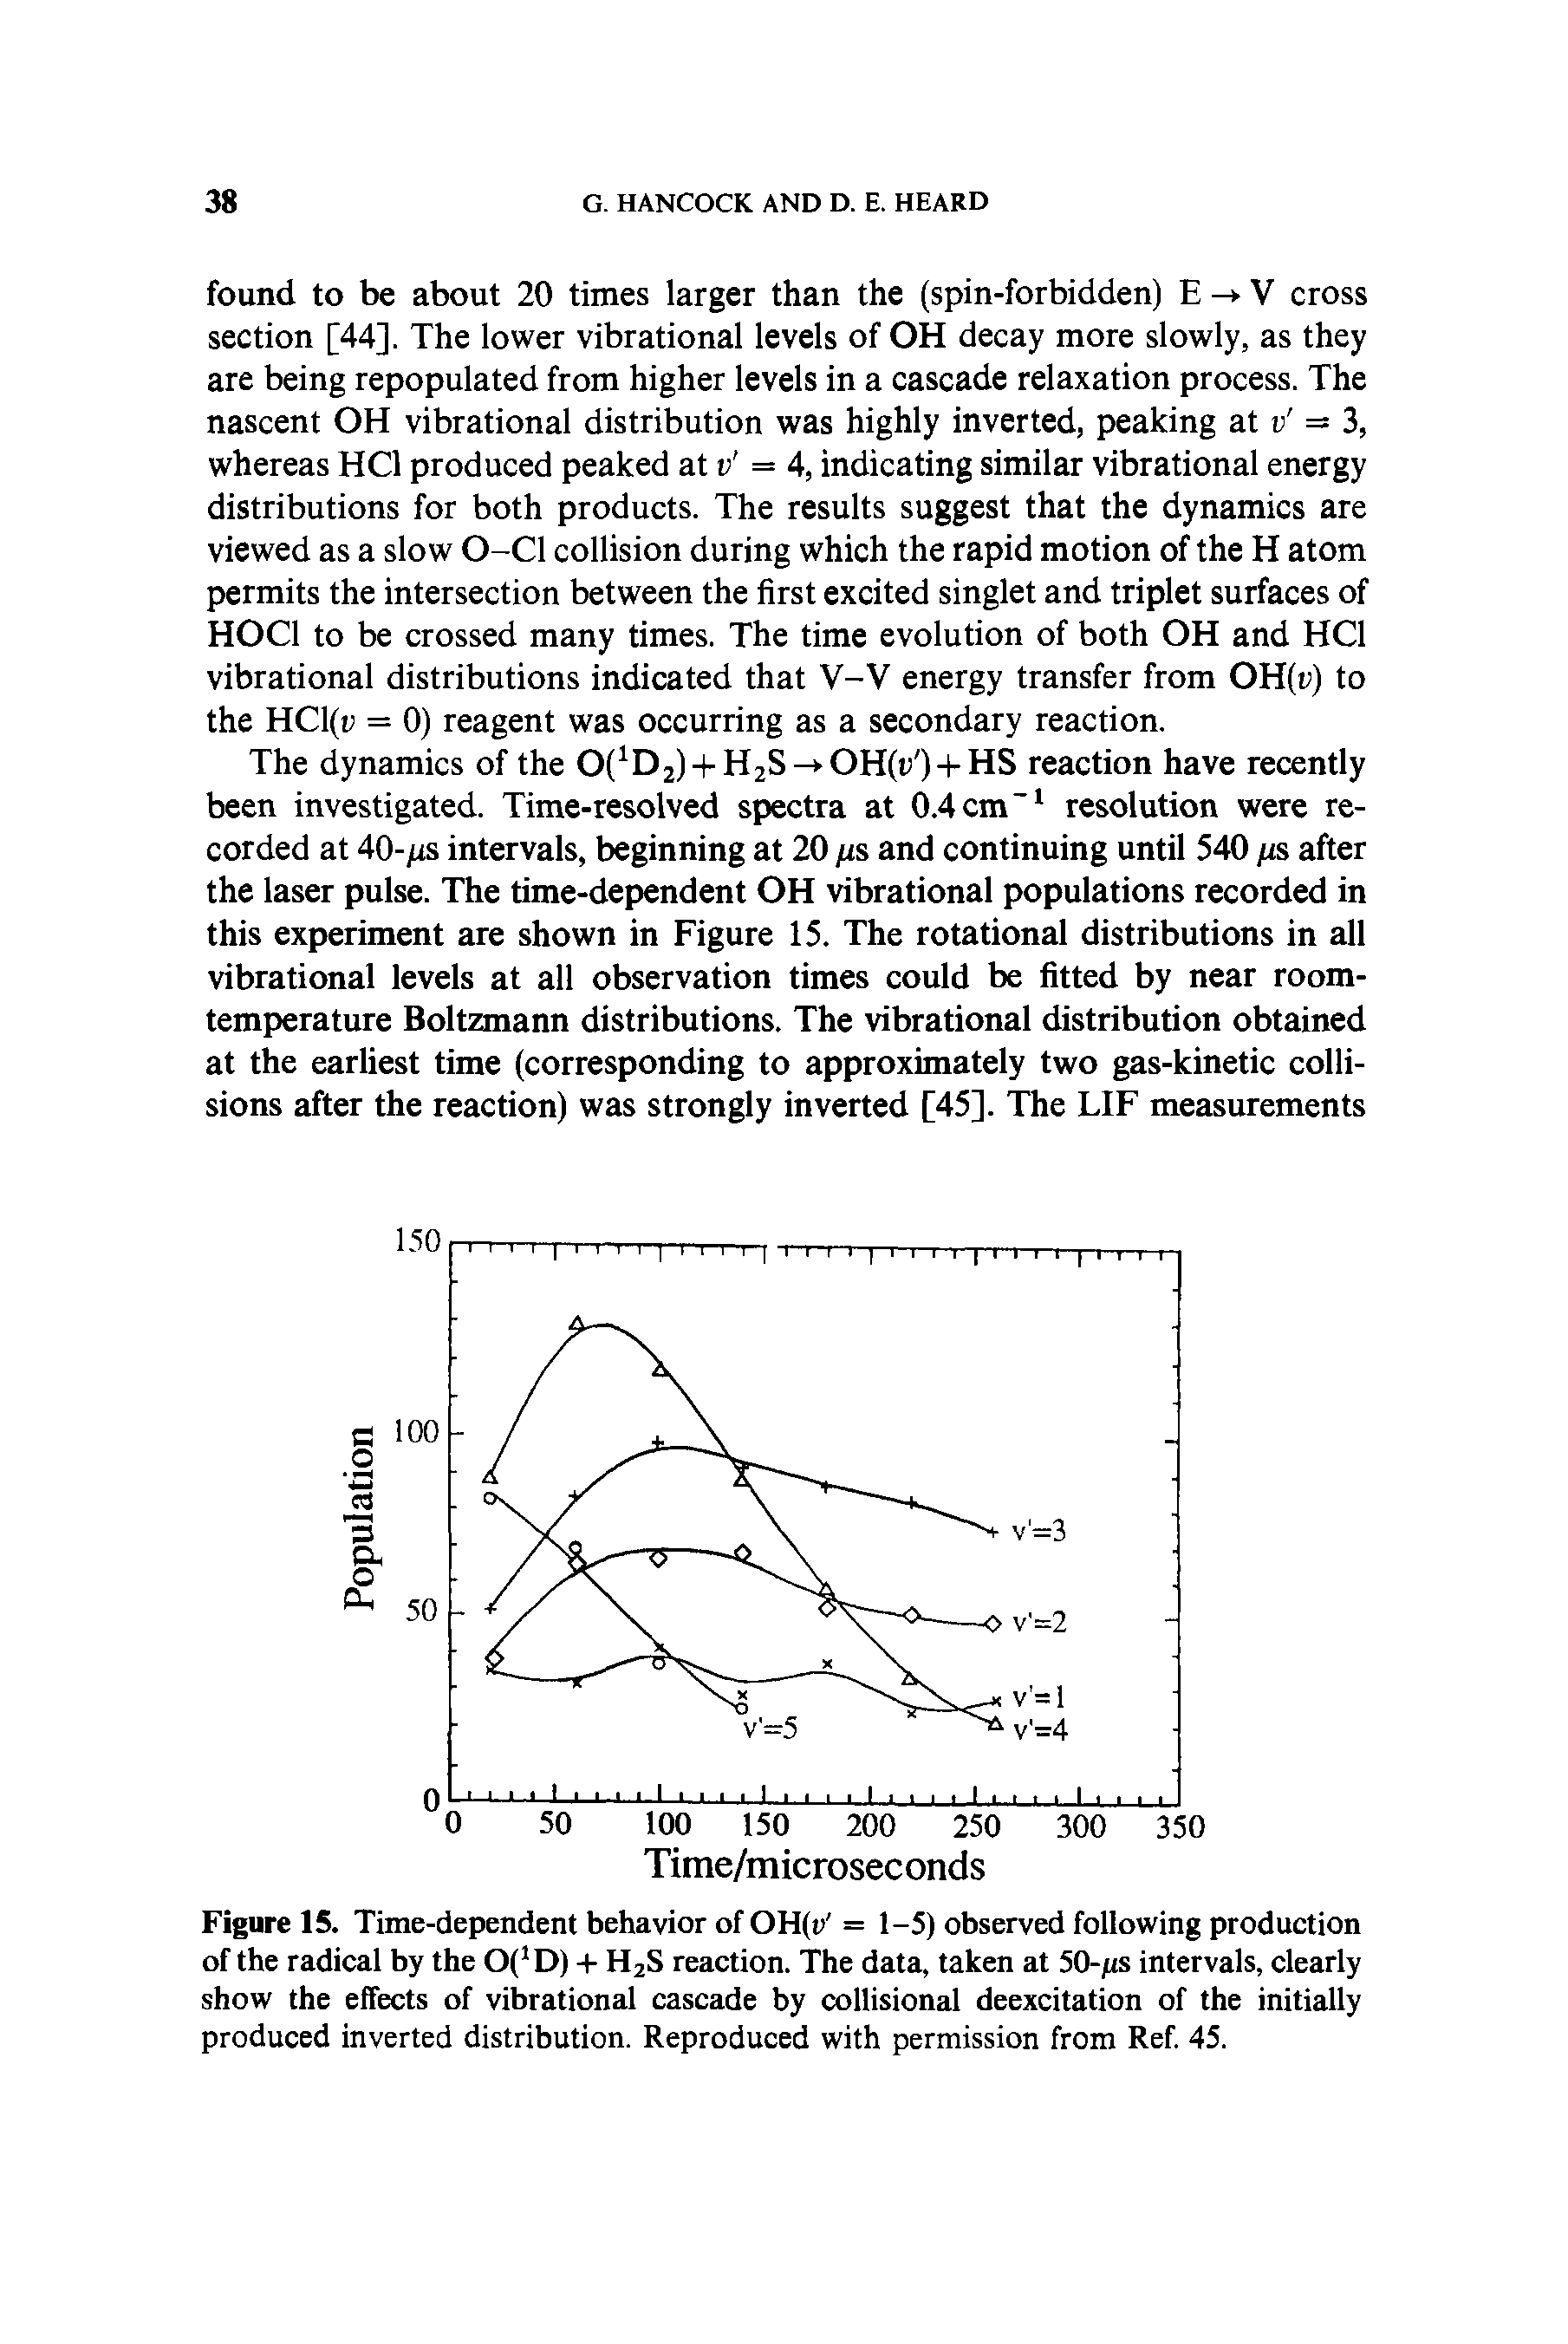 Figure 15. Time-dependent behavior of OH(t> = 1-5) observed following production of the radical by the 0( D) + H2S reaction. The data, taken at 50- s intervals, clearly show the effects of vibrational cascade by collisional deexcitation of the initially produced inverted distribution. Reproduced with permission from Ref. 45.